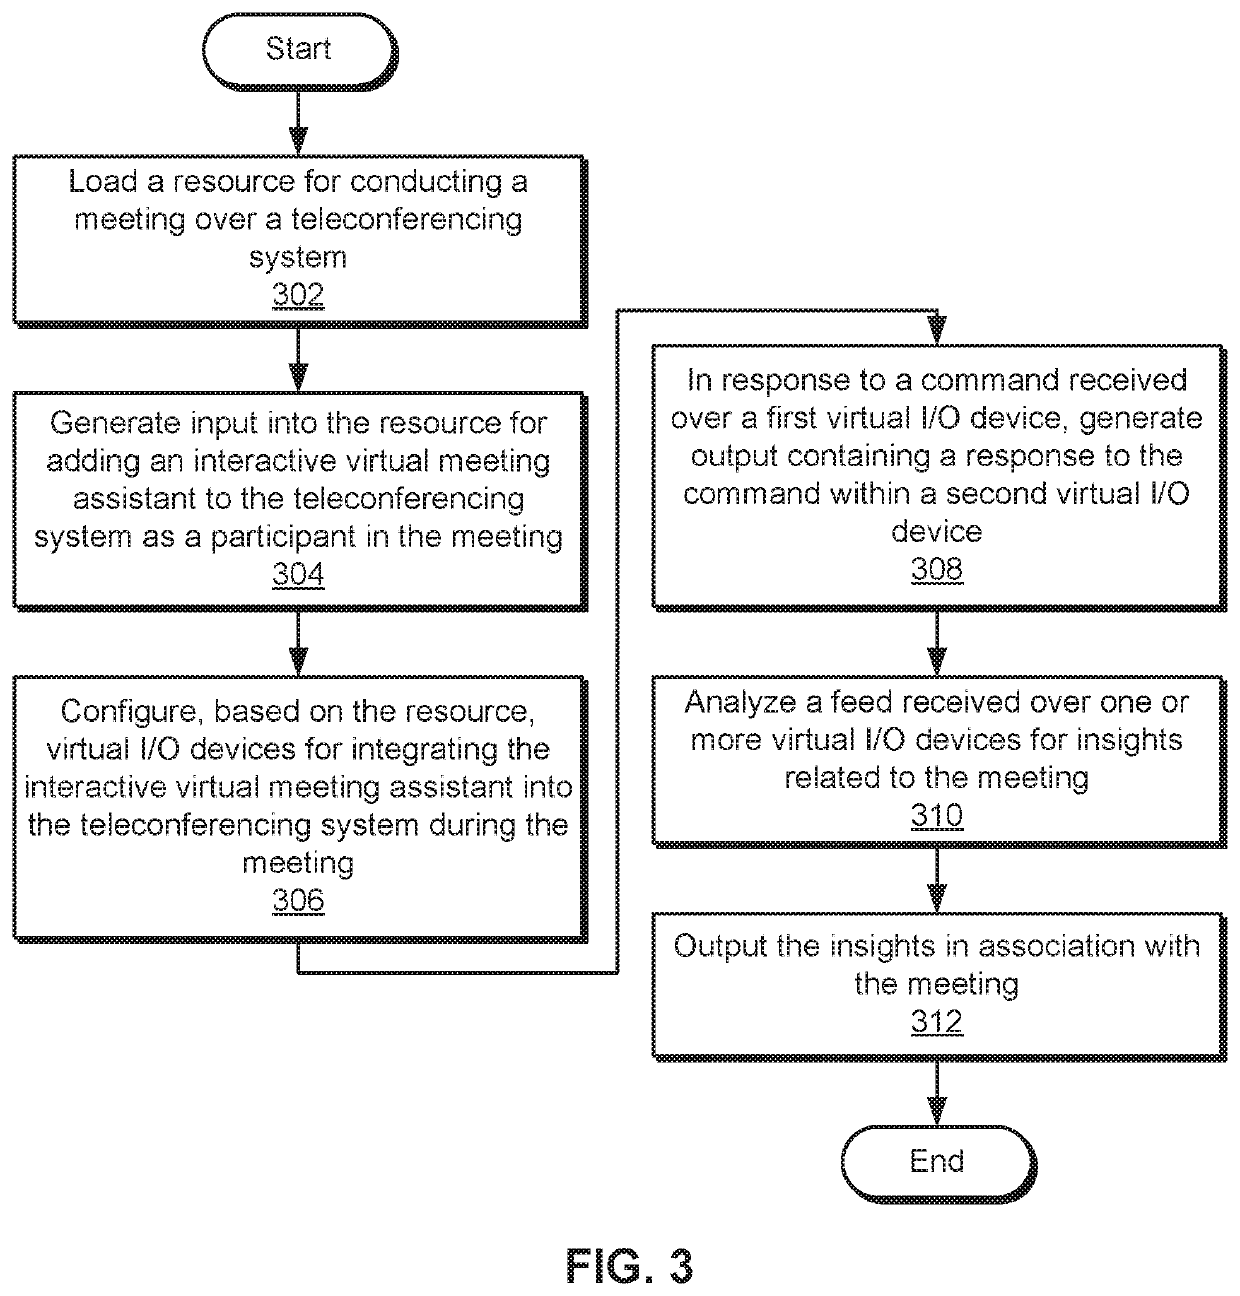 Enhancing meeting participation by an interactive virtual assistant